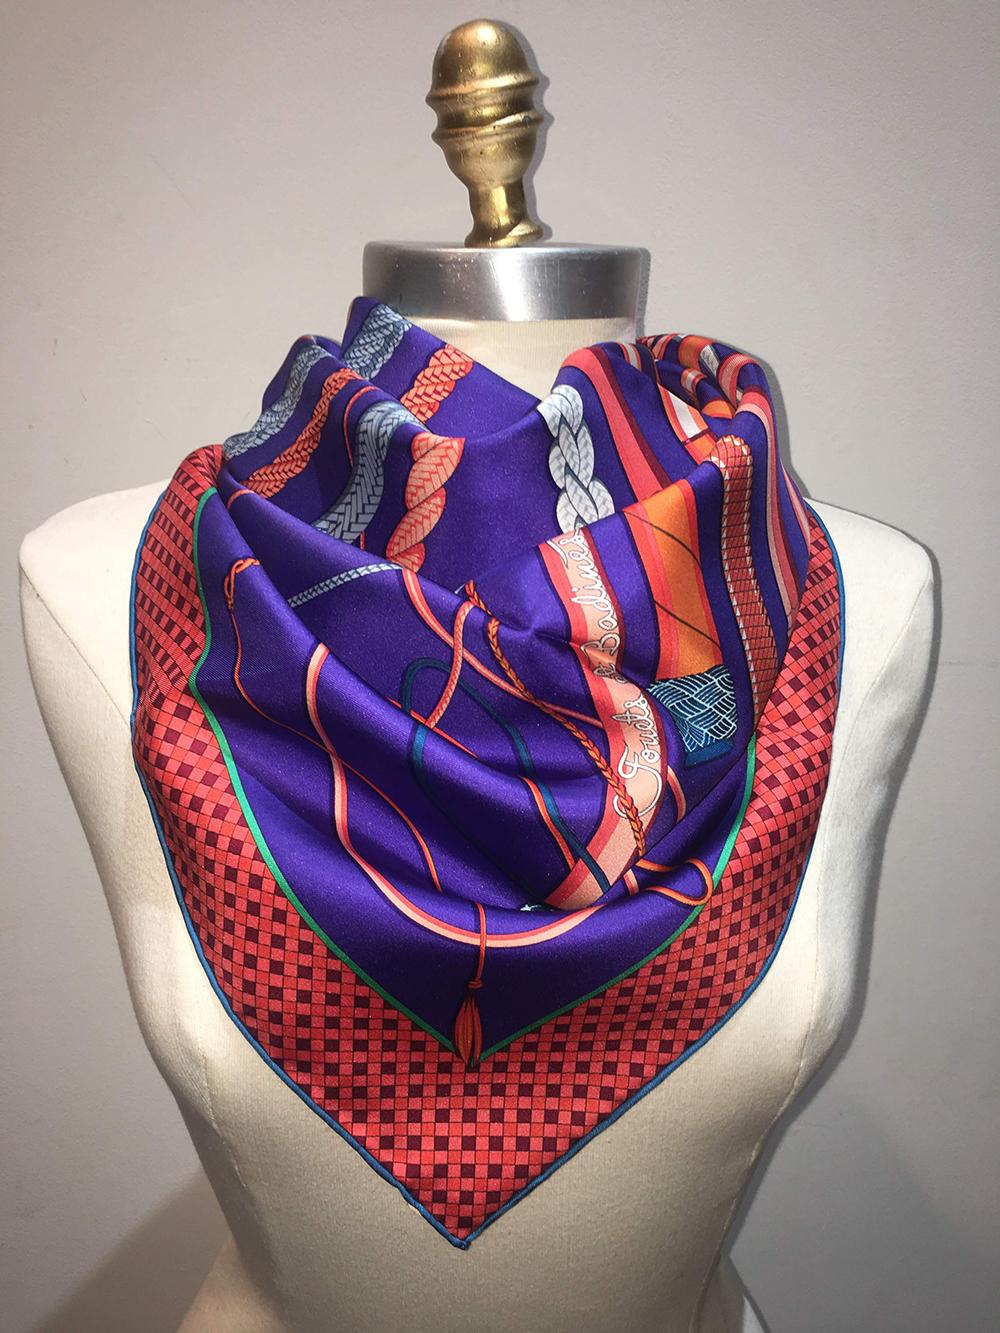 Hermes Fouets et Badines Silk Scarf in Orange and Purple in excellent like new condition. Original silk screen design c2018 by Virginie Jamin features a vibrant print of 14 different leather whips in oranges and blues over a royal purple background